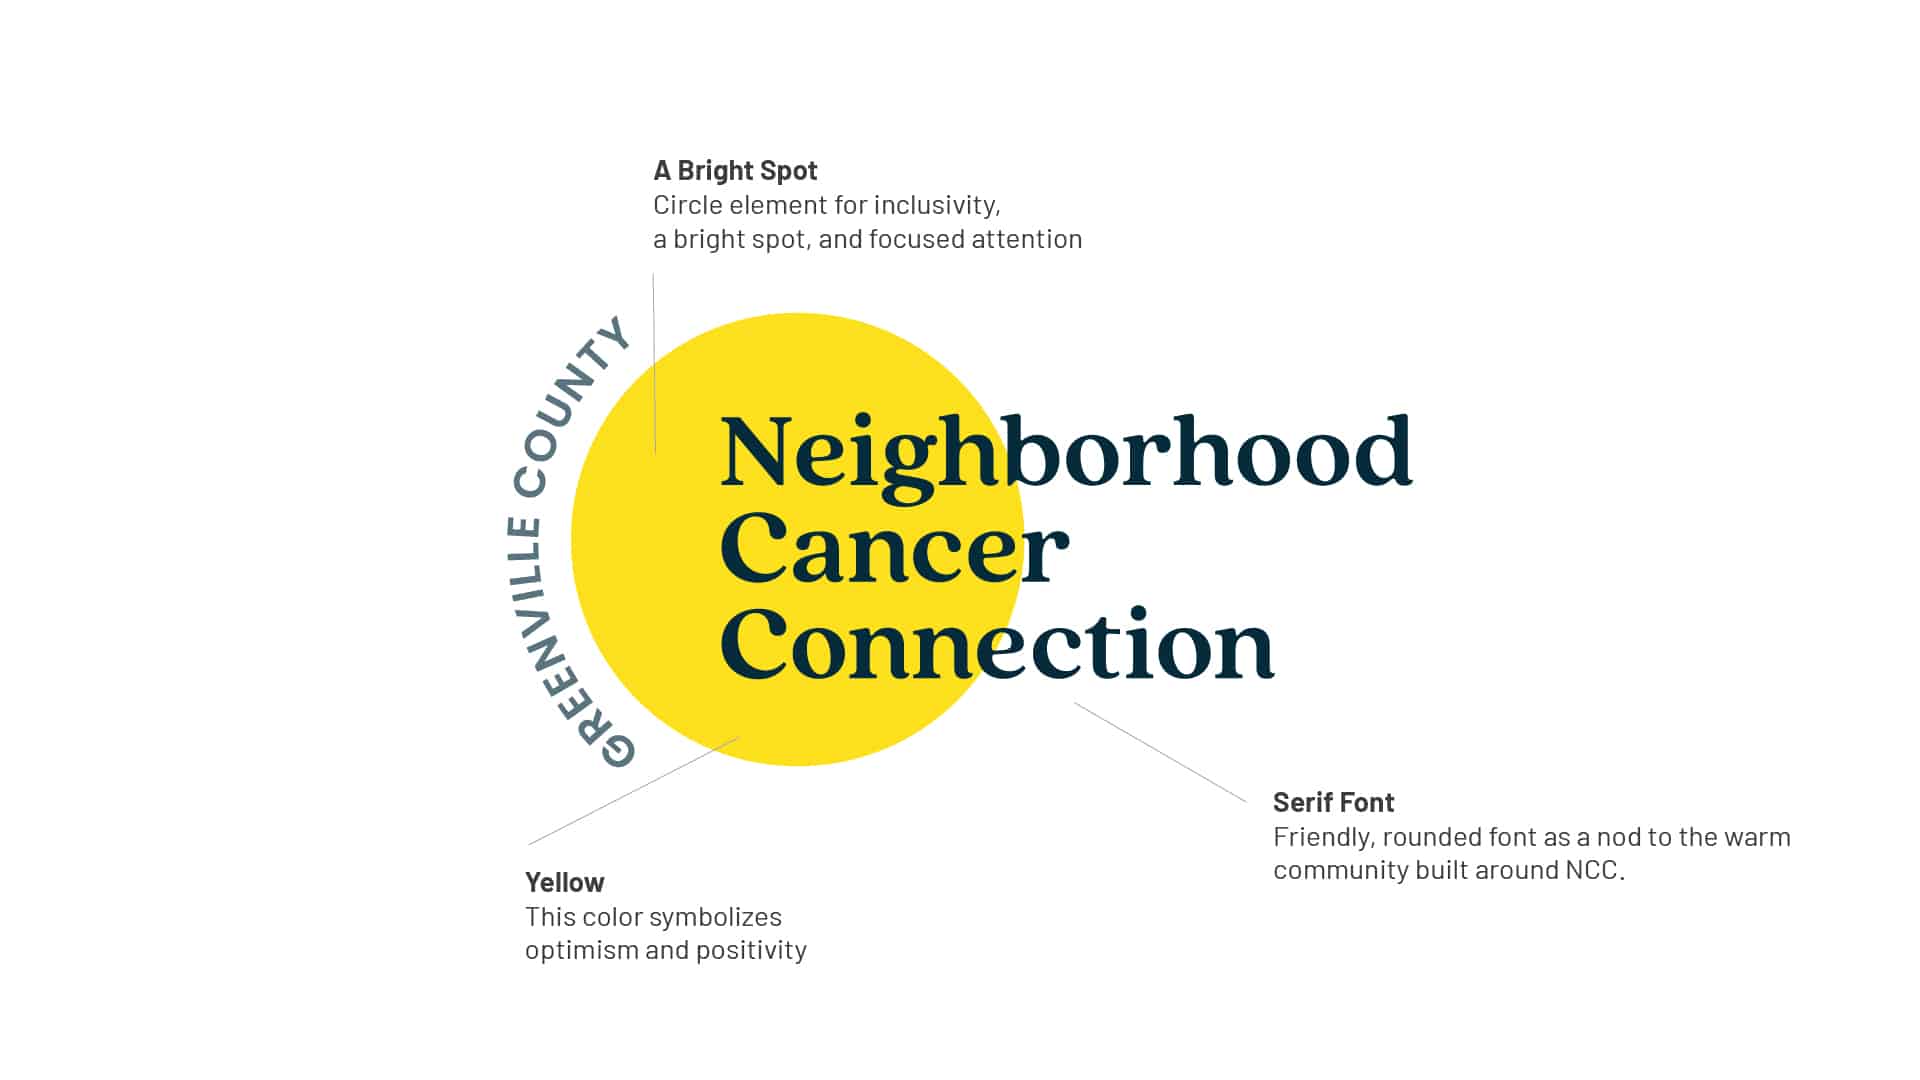 Neighborhood Cancer Connection Logo Meaning